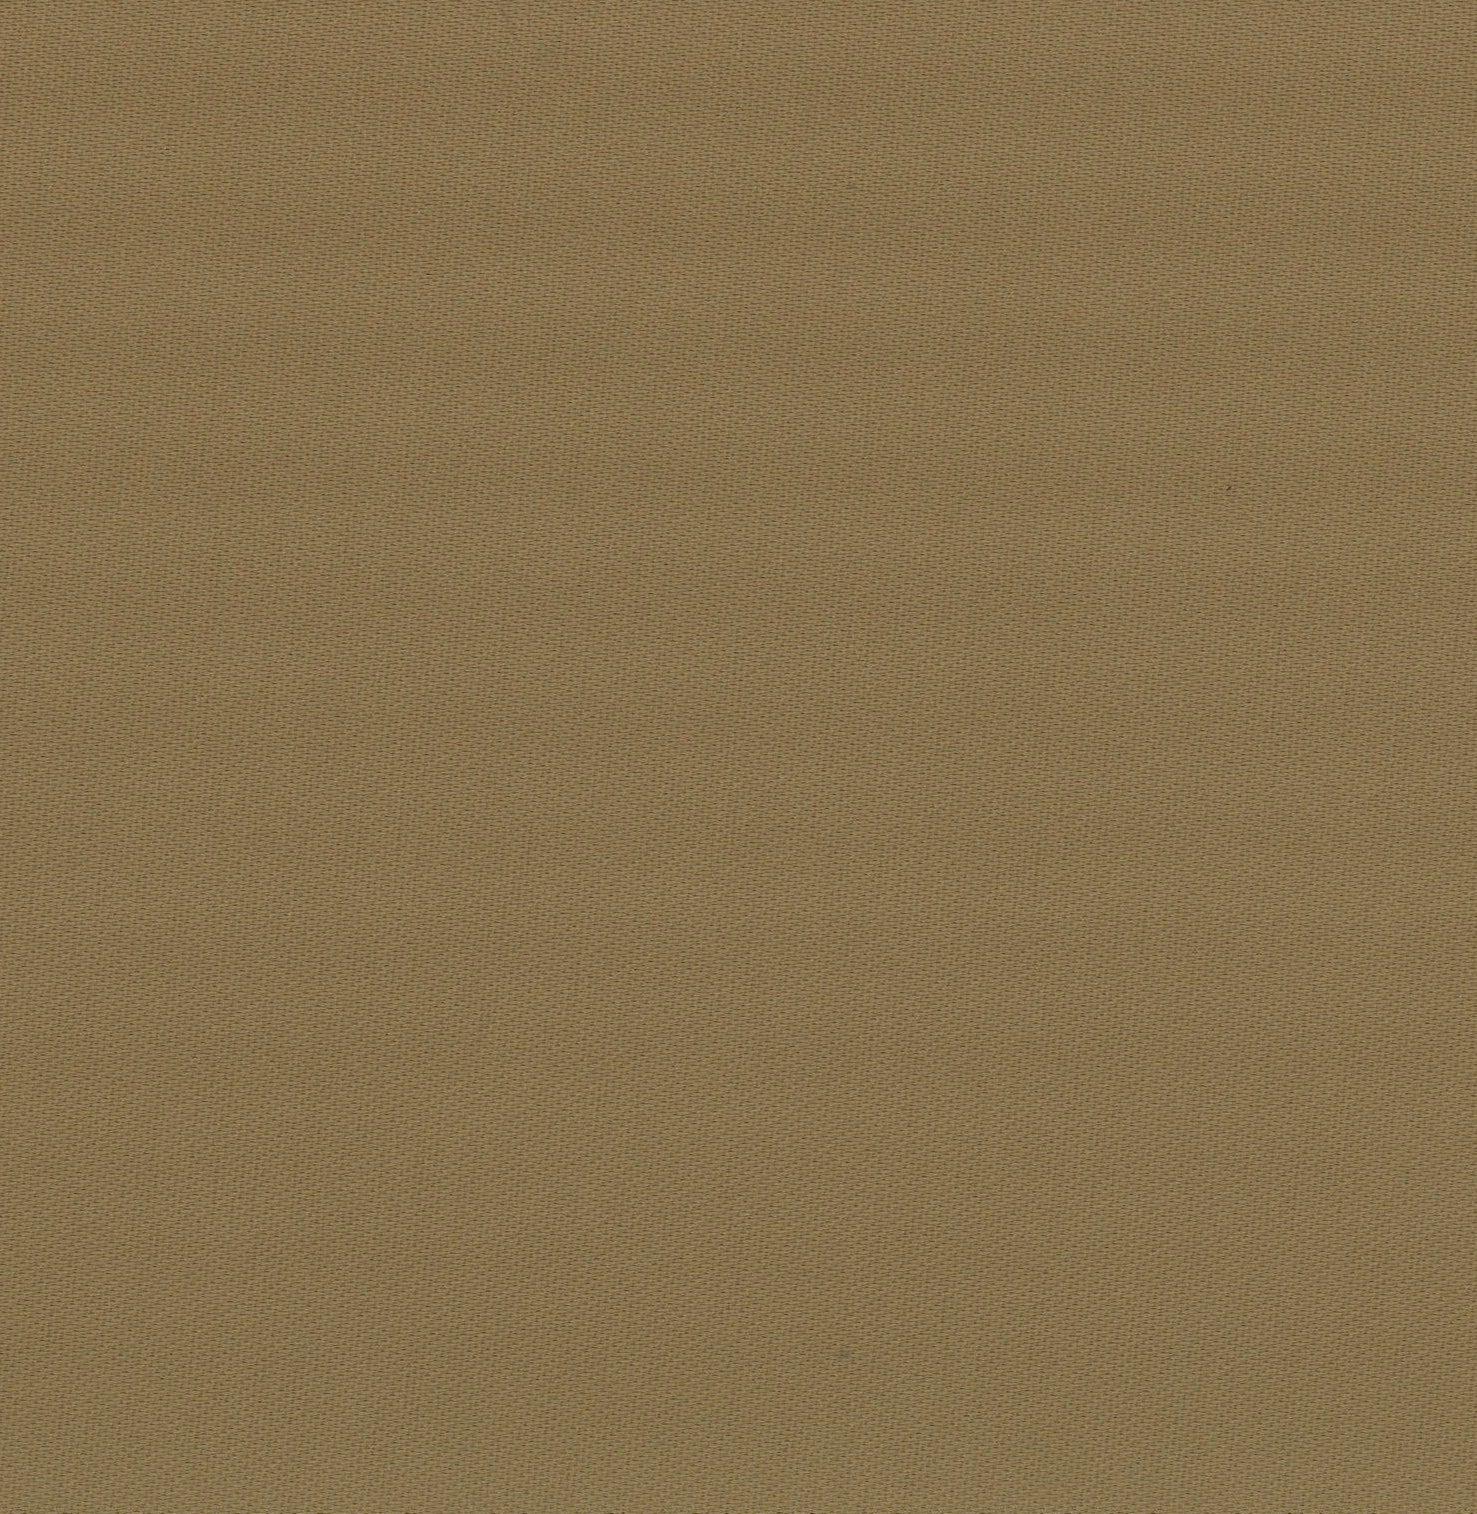 33006-02 Umber Woven Stretch Plain Dyed Blend 274g/yd 53&quot; beige plain dyed polyester spandex woven woven stretch Solid Color - knit fabric - woven fabric - fabric company - fabric wholesale - fabric b2b - fabric factory - high quality fabric - hong kong fabric - fabric hk - acetate fabric - cotton fabric - linen fabric - metallic fabric - nylon fabric - polyester fabric - spandex fabric - chun wing hing - cwh hk - fabric worldwide ship - 針織布 - 梳織布 - 布料公司- 布料批發 - 香港布料 - 秦榮興